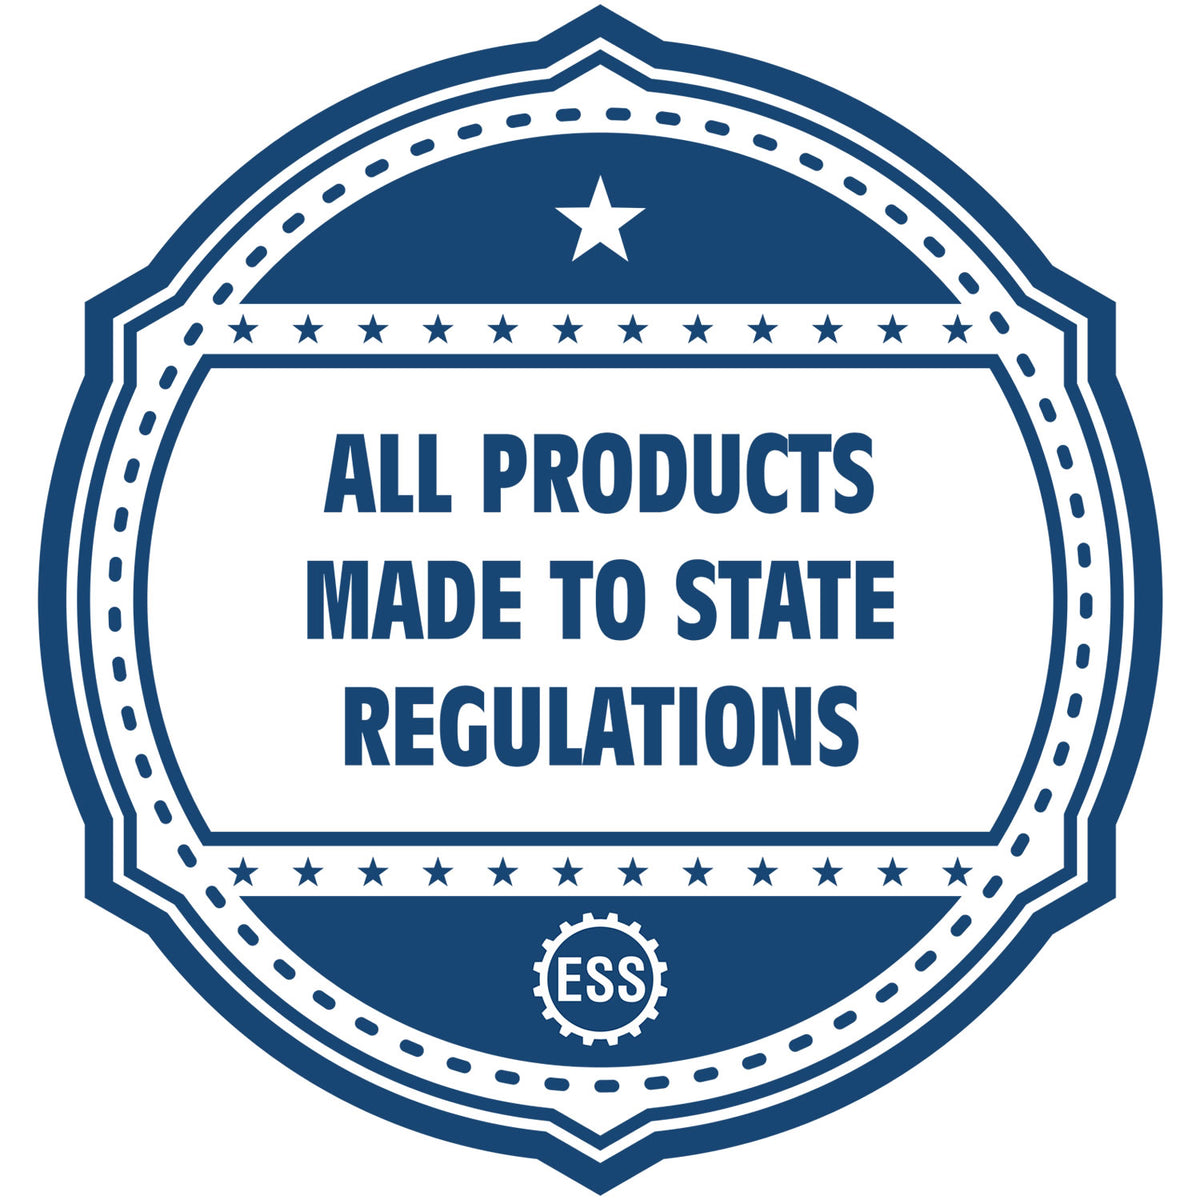 A blue icon or badge for the Gift Missouri Engineer Seal showing that this product is made in compliance with state regulations.